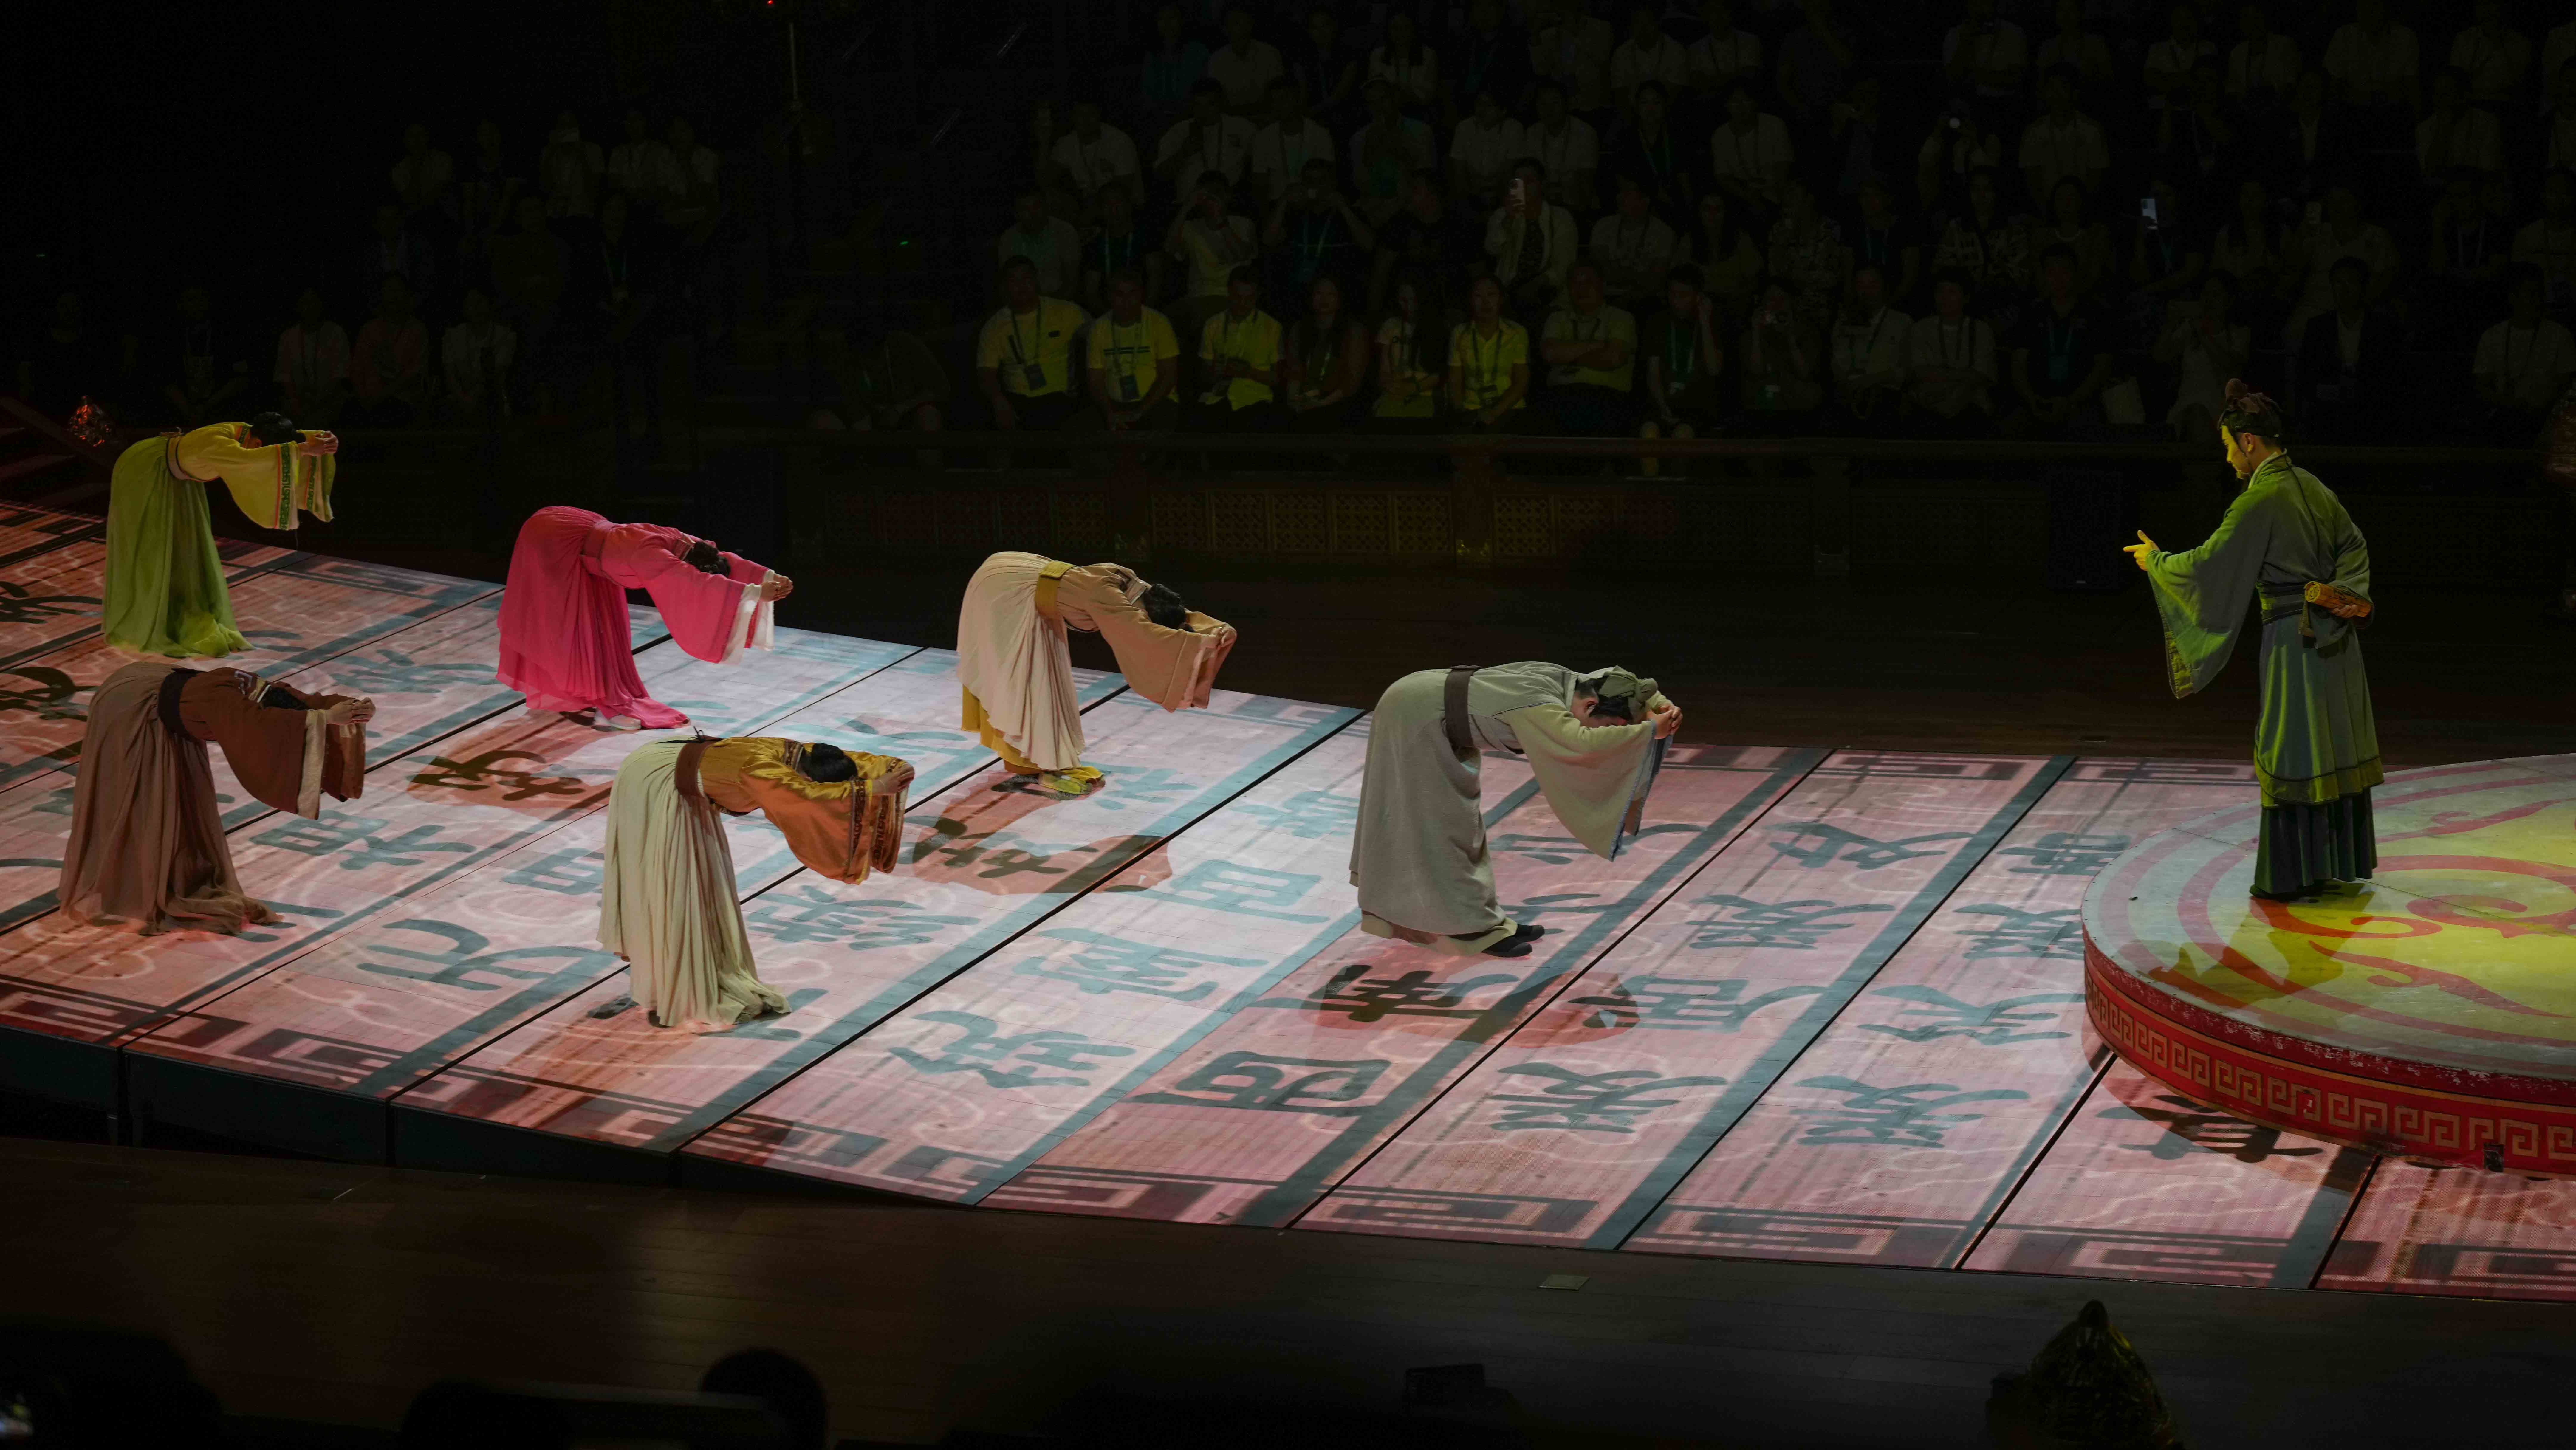 Immerse in the spectacle of 'Jinshengyuzhen' show